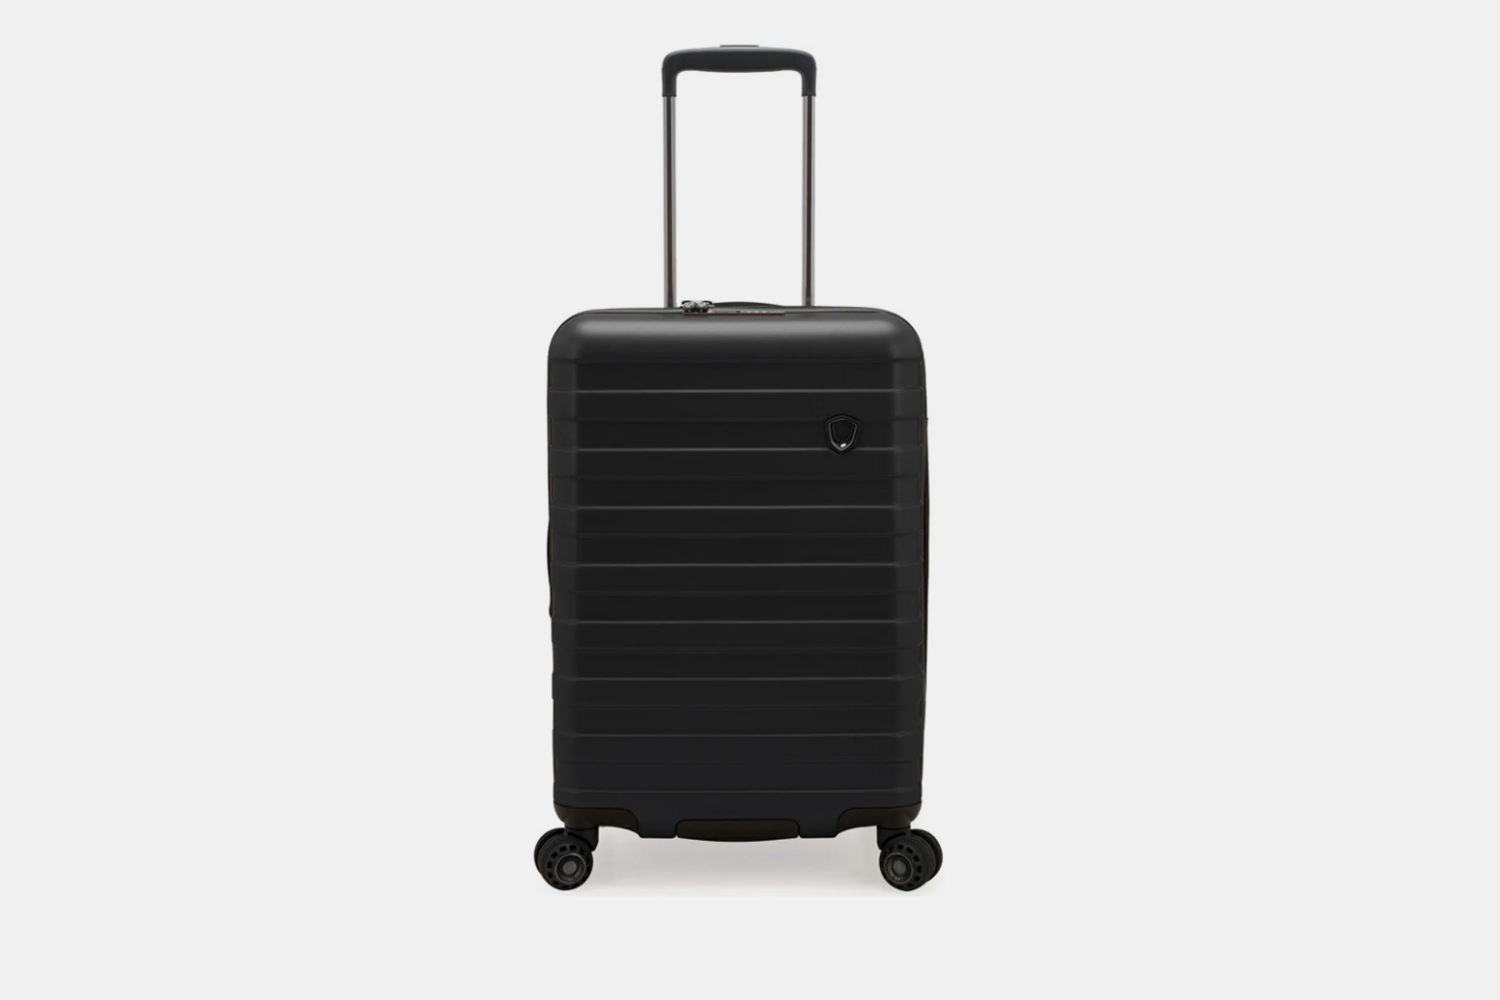 Traveler's Choice Millennial 21" Expandable Hardside Carry-On Spinner Luggage